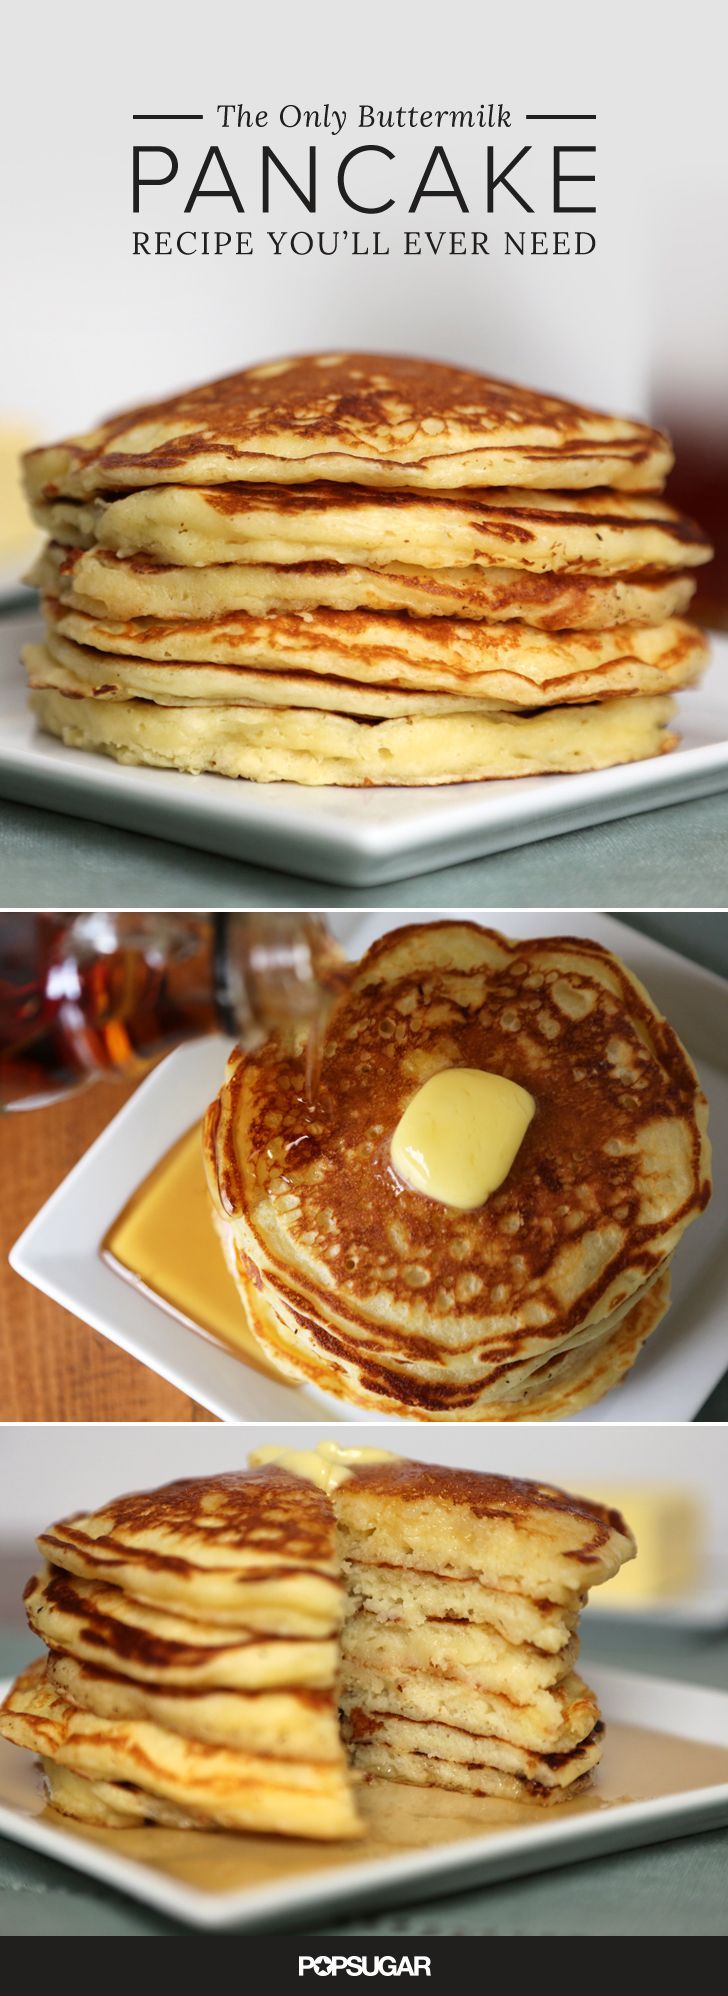 While many resort to pancake mix when making a special weekend breakfast, homemade pancakes are a must. Th